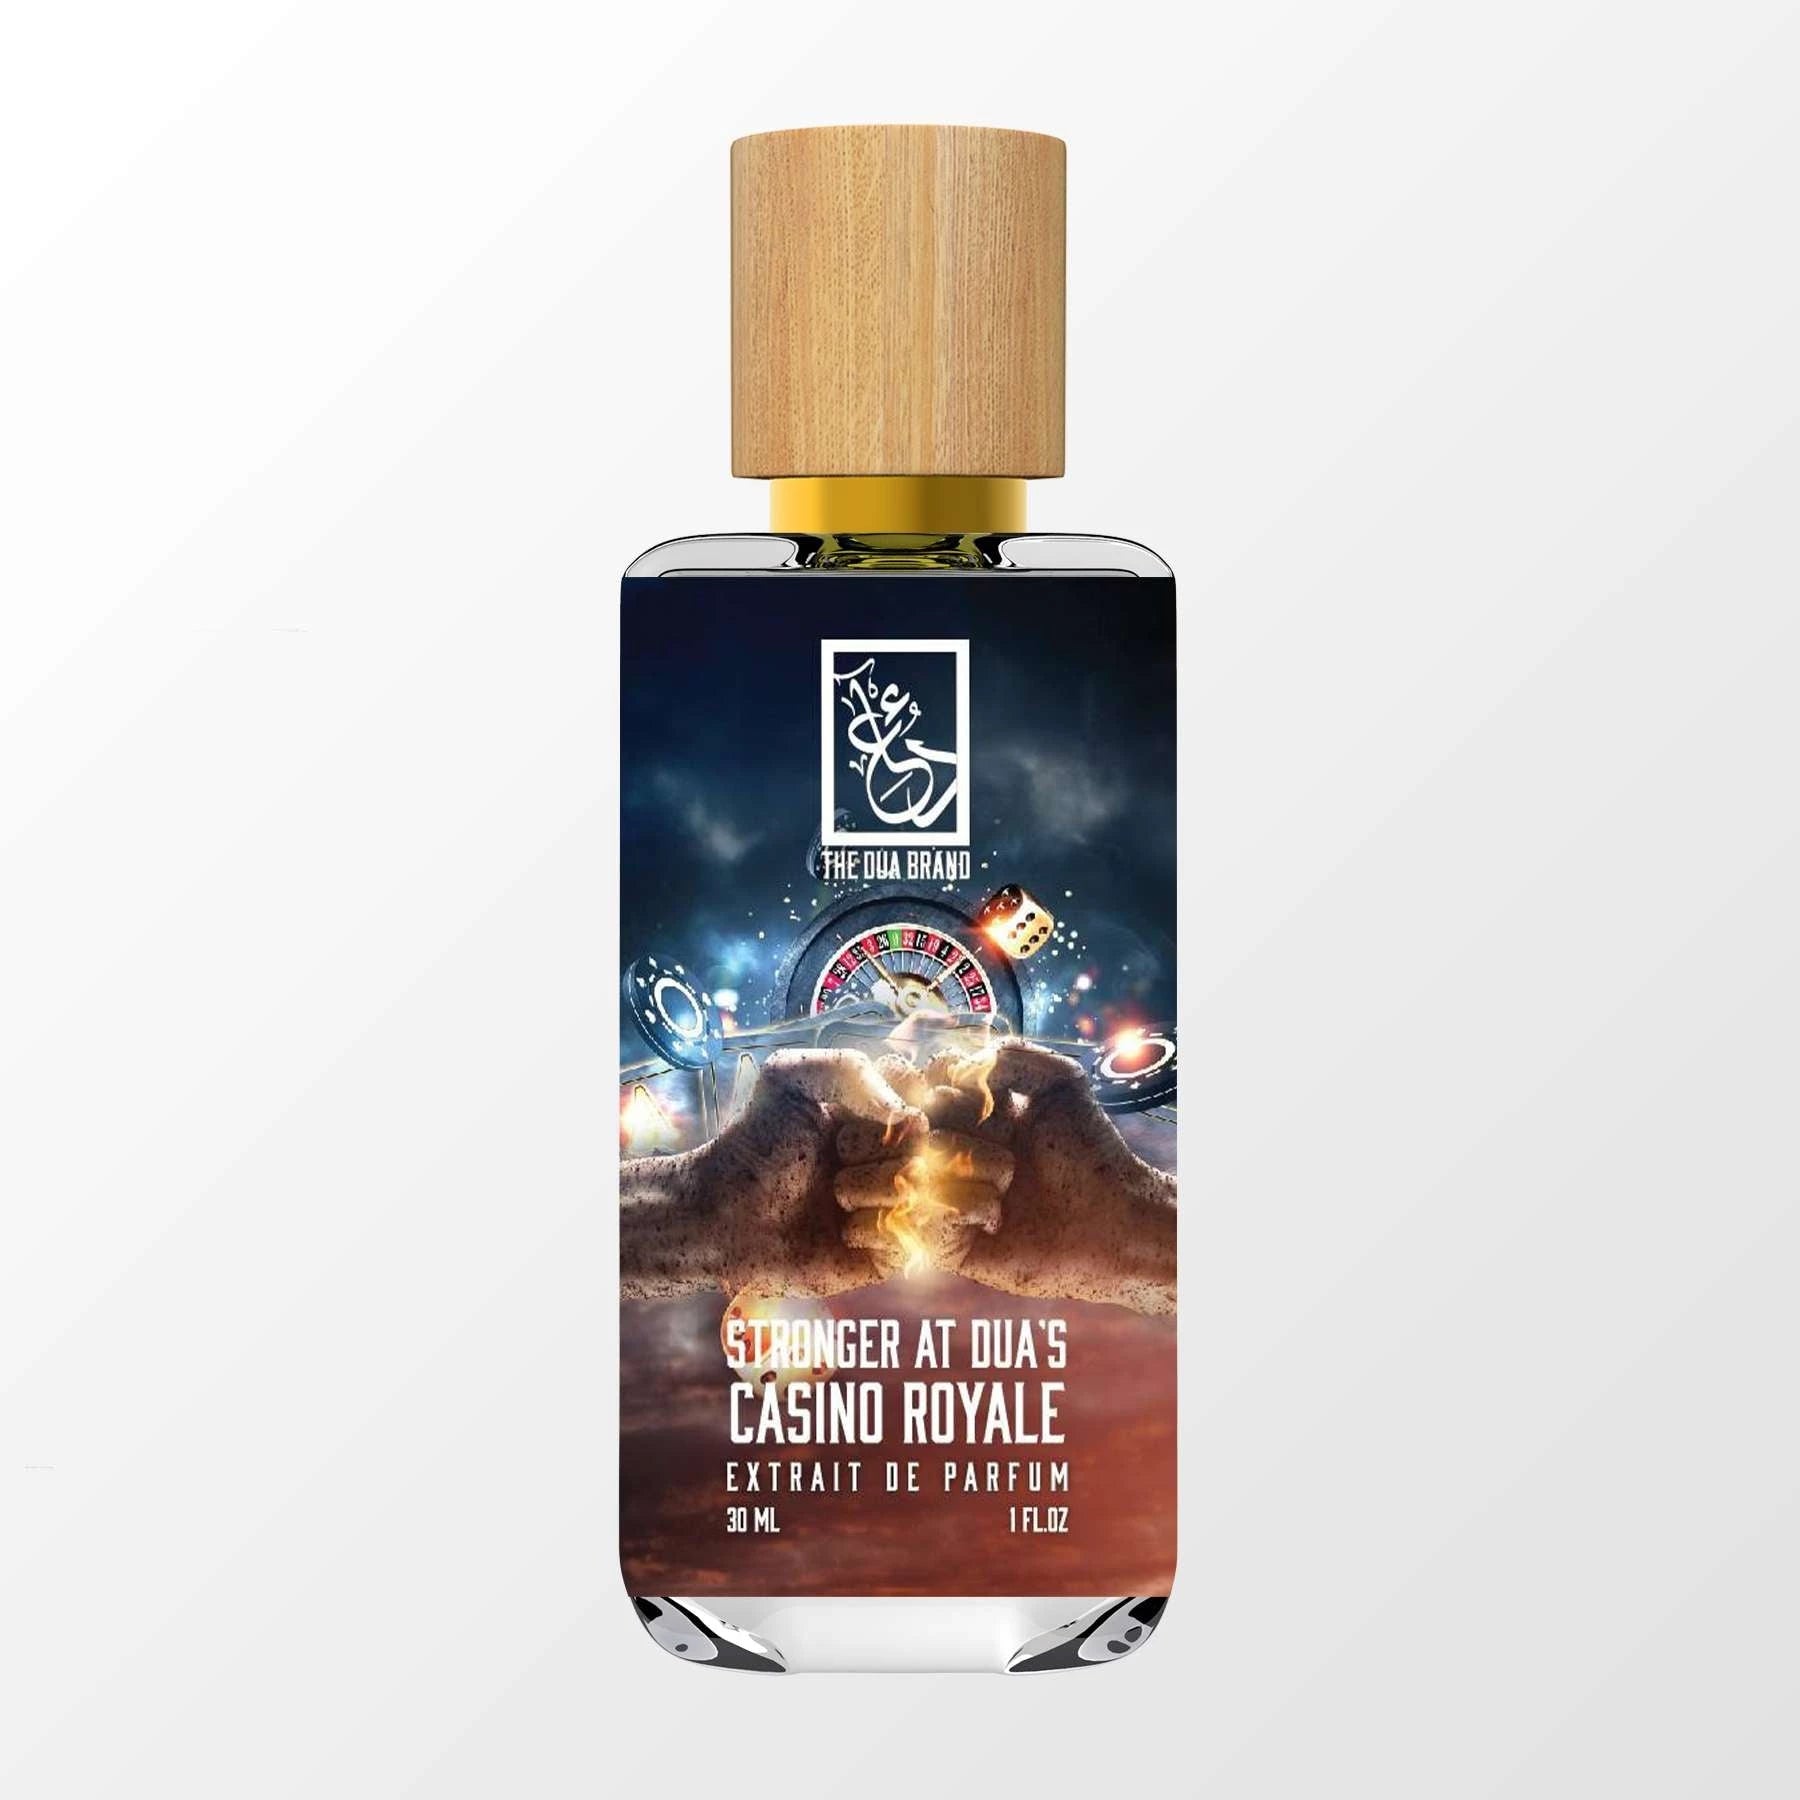 I Might Stop By Perfume Oil  Ambroxan Molecule Fragrance with